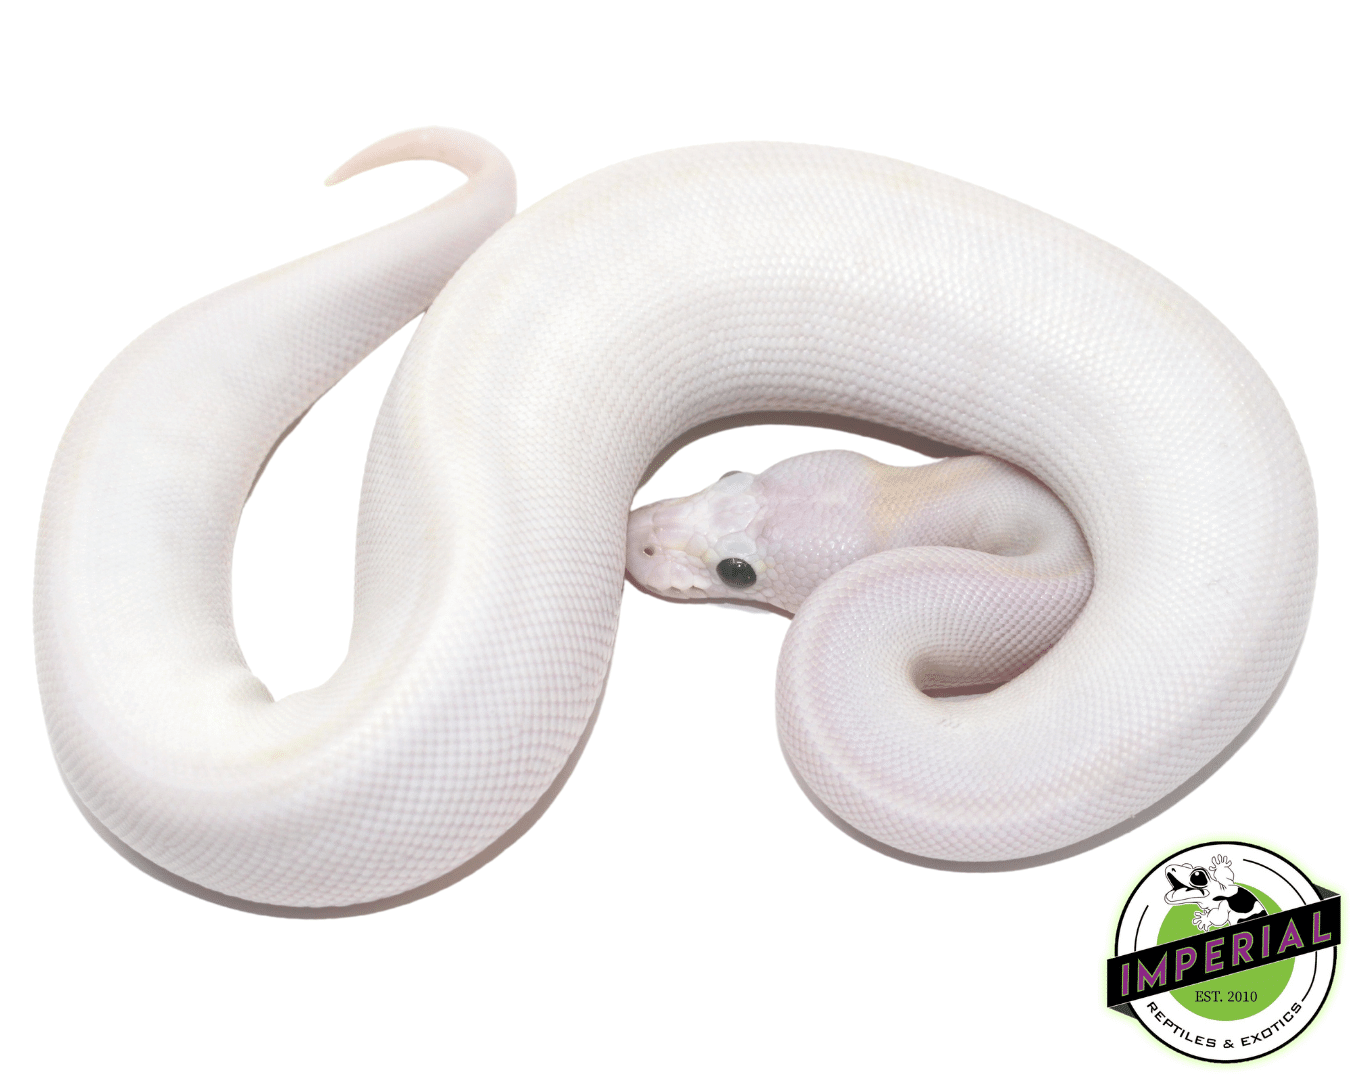 pastel ivory ball python for sale online, buy cheap ball pythons near me